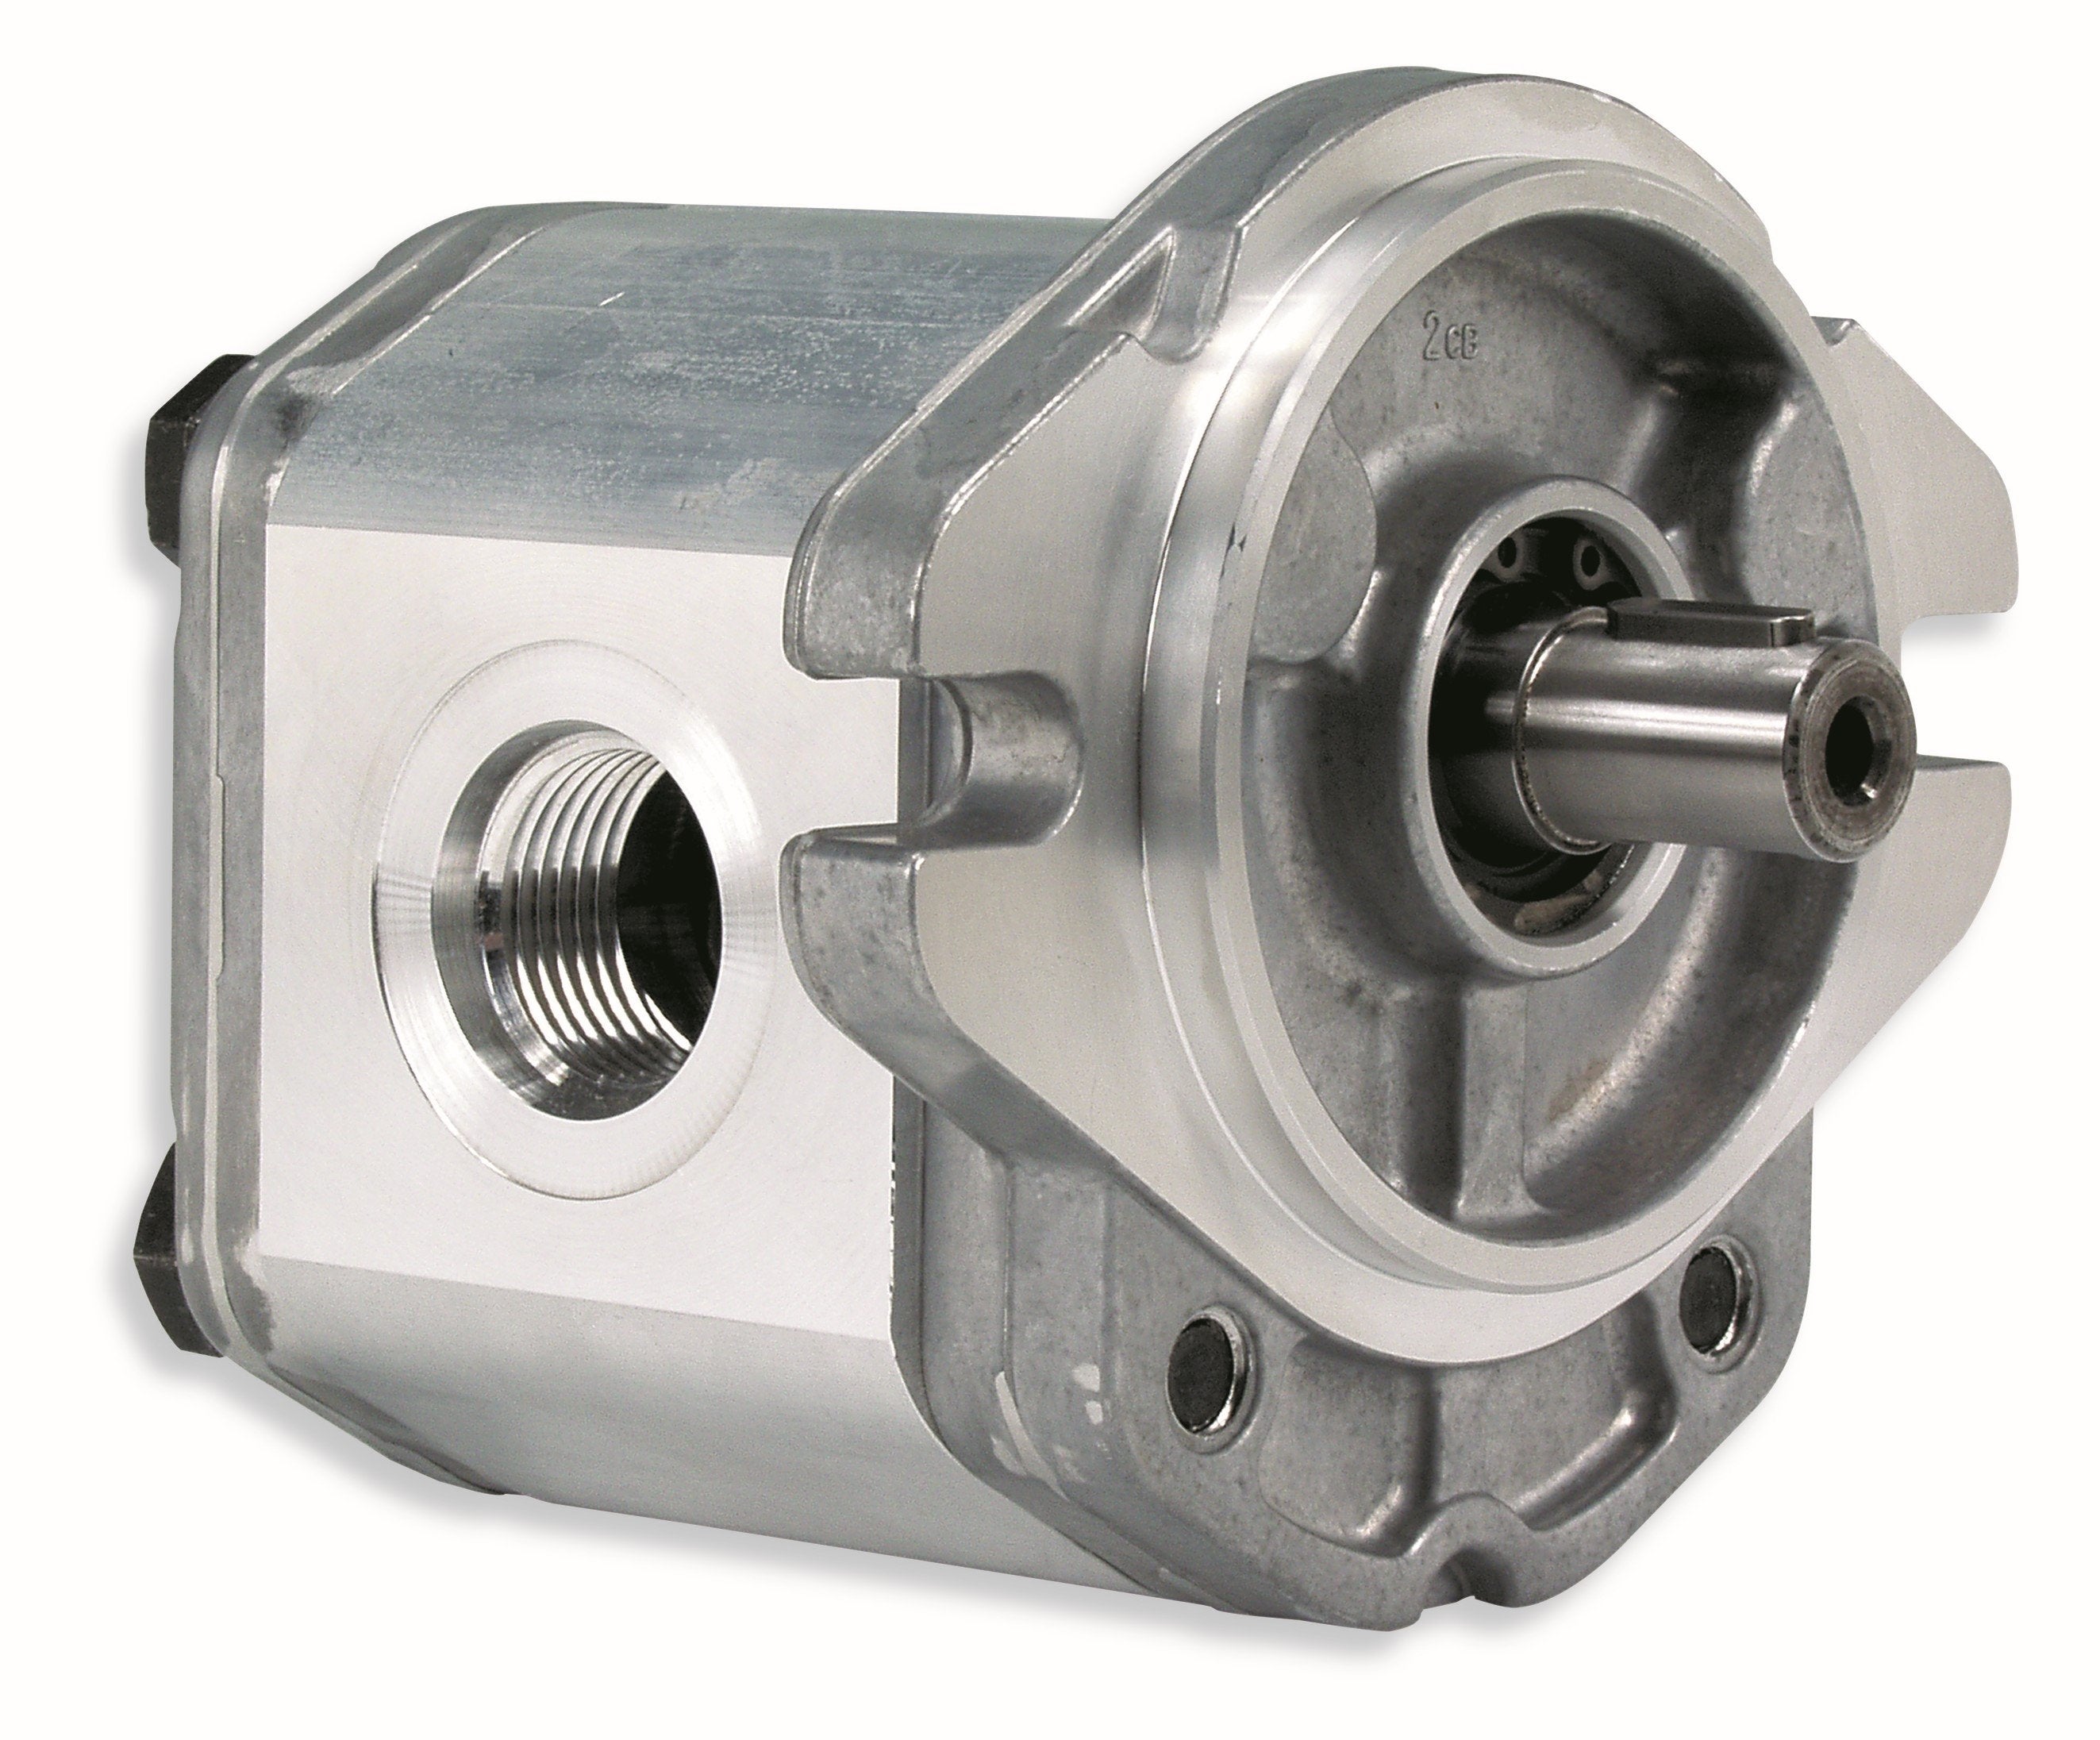 GHM3A-R-60-E4 : Marzocchi Gear Motor, Bidirectional, 39cc, 3770psi rated, 3000RPM, 1" Code 61 ports, 7/8" Bore x 1/4" Keyed Shaft